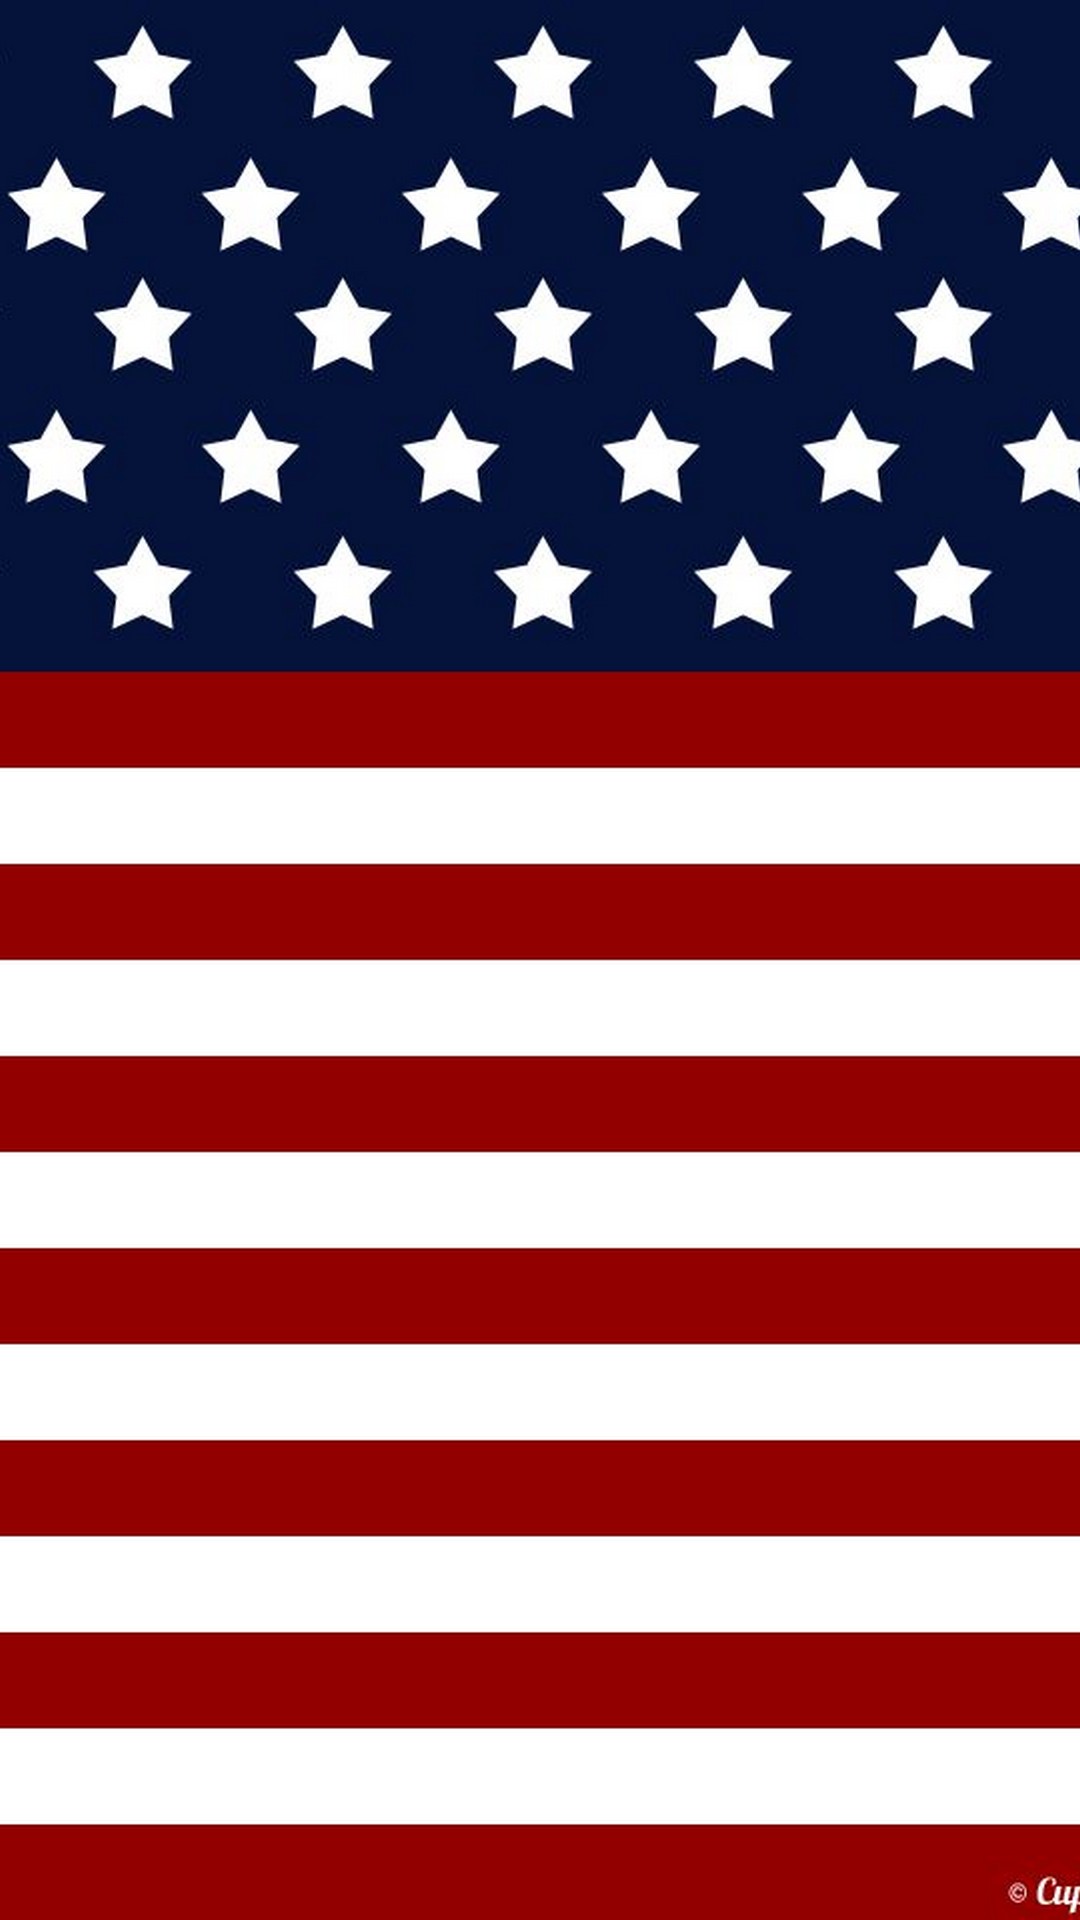 American Flag iPhone Home Screen Wallpaper with high-resolution 1080x1920 pixel. You can set as wallpaper for Apple iPhone X, XS Max, XR, 8, 7, 6, SE, iPad. Enjoy and share your favorite HD wallpapers and background images